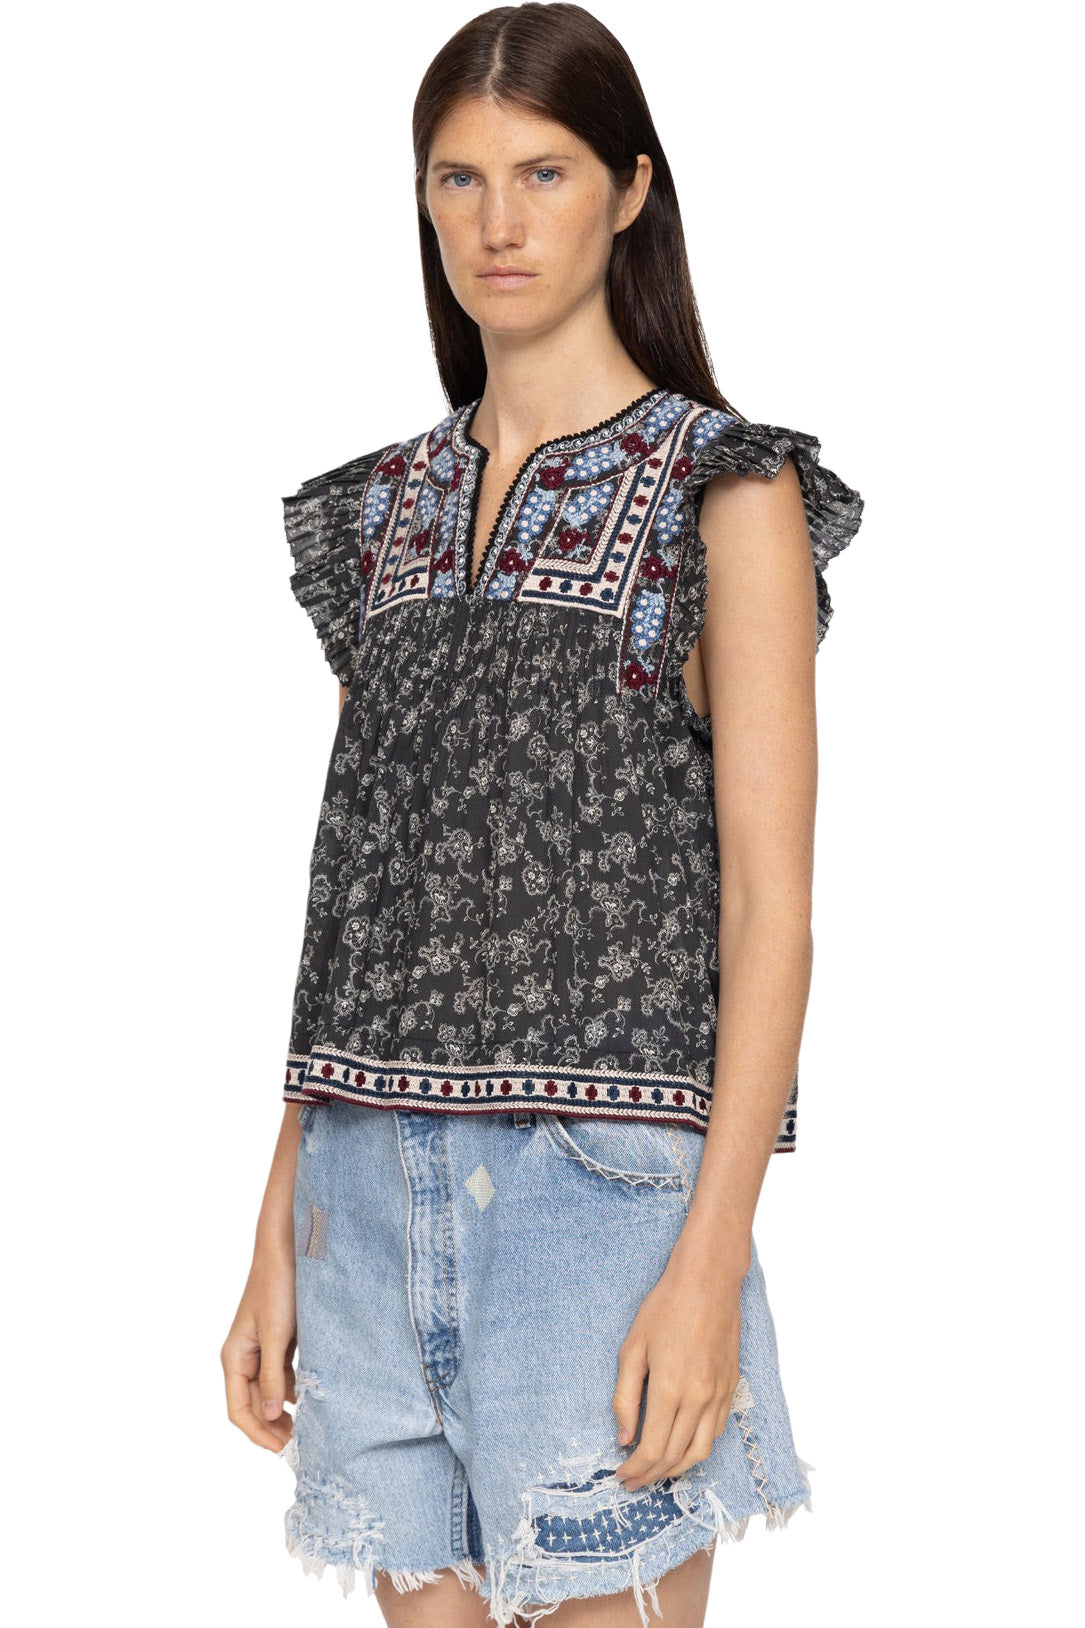 Sea, New York Everly Embroidered Top in Black